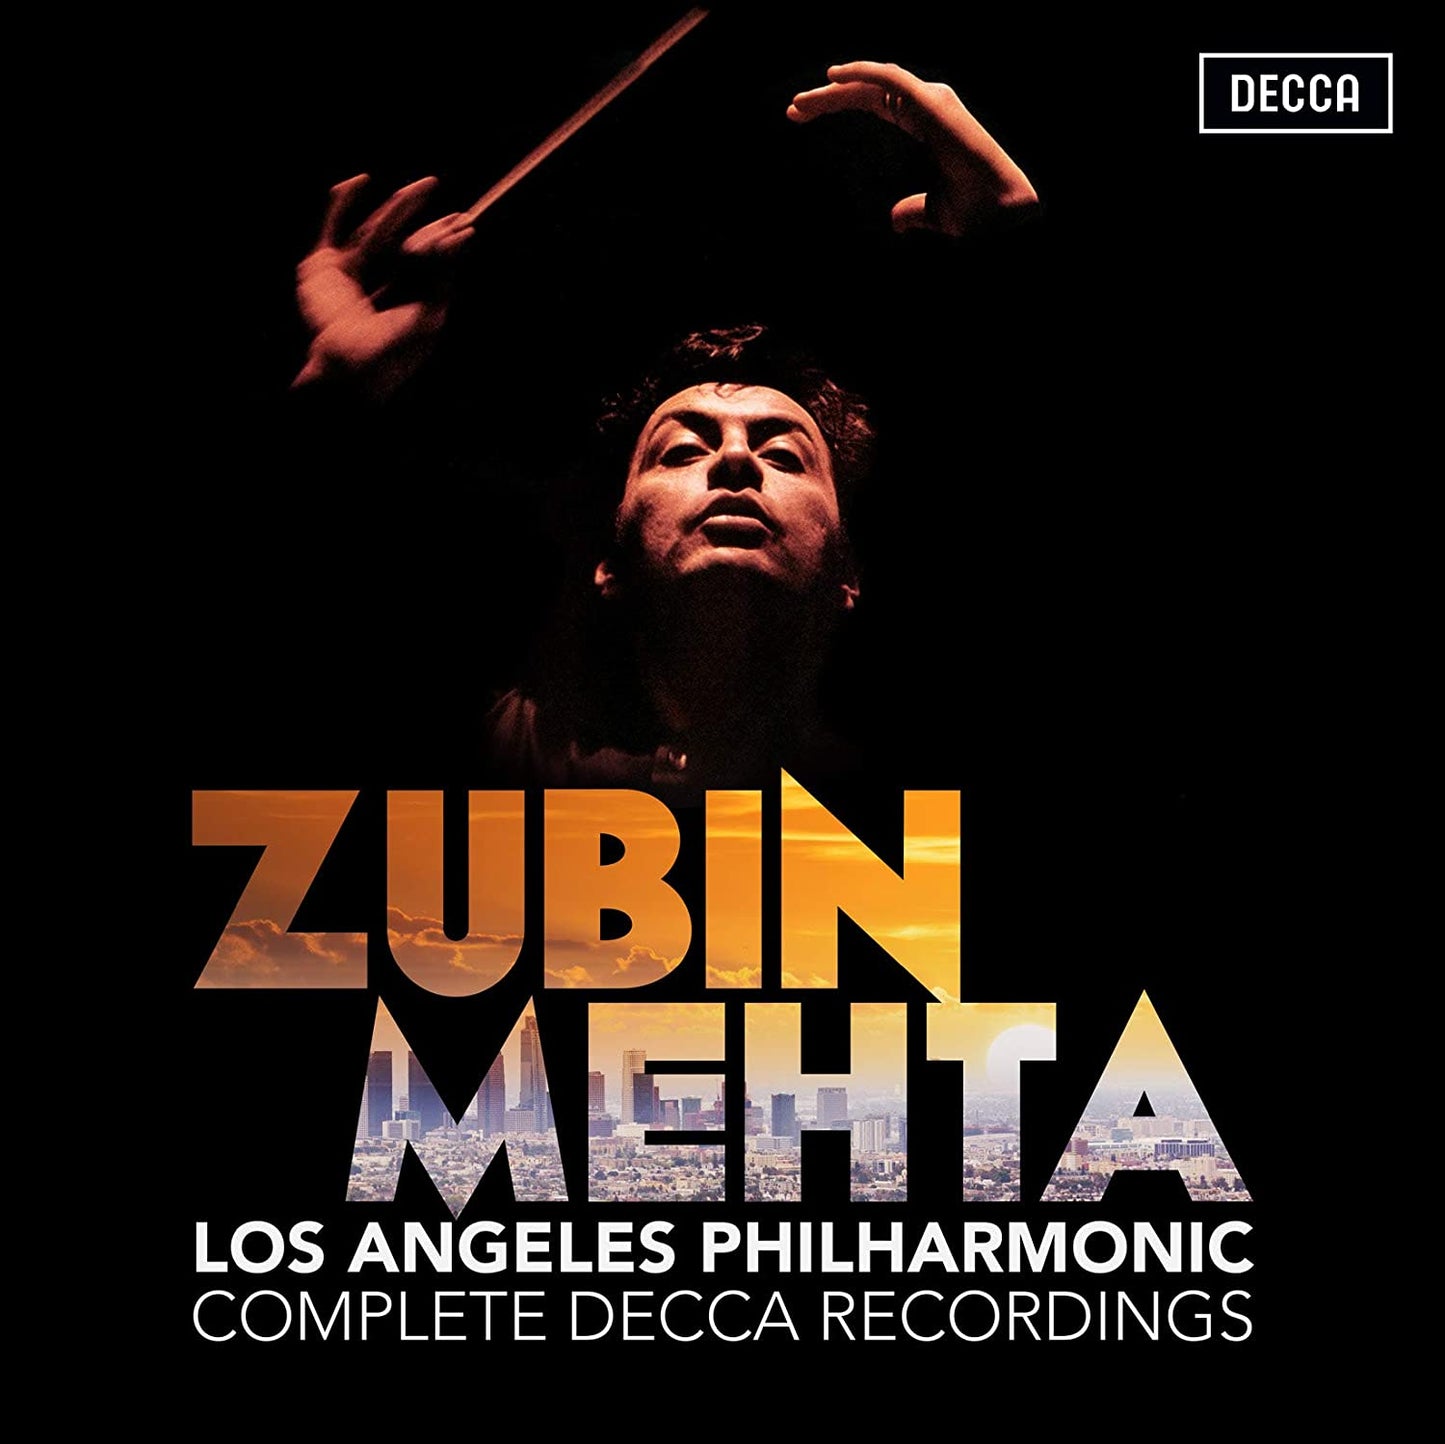 ZUBIN MEHTA AND THE LOS ANGELES PHILHARMONIC - COMPLETE DECCA RECORDINGS (38 CDS)